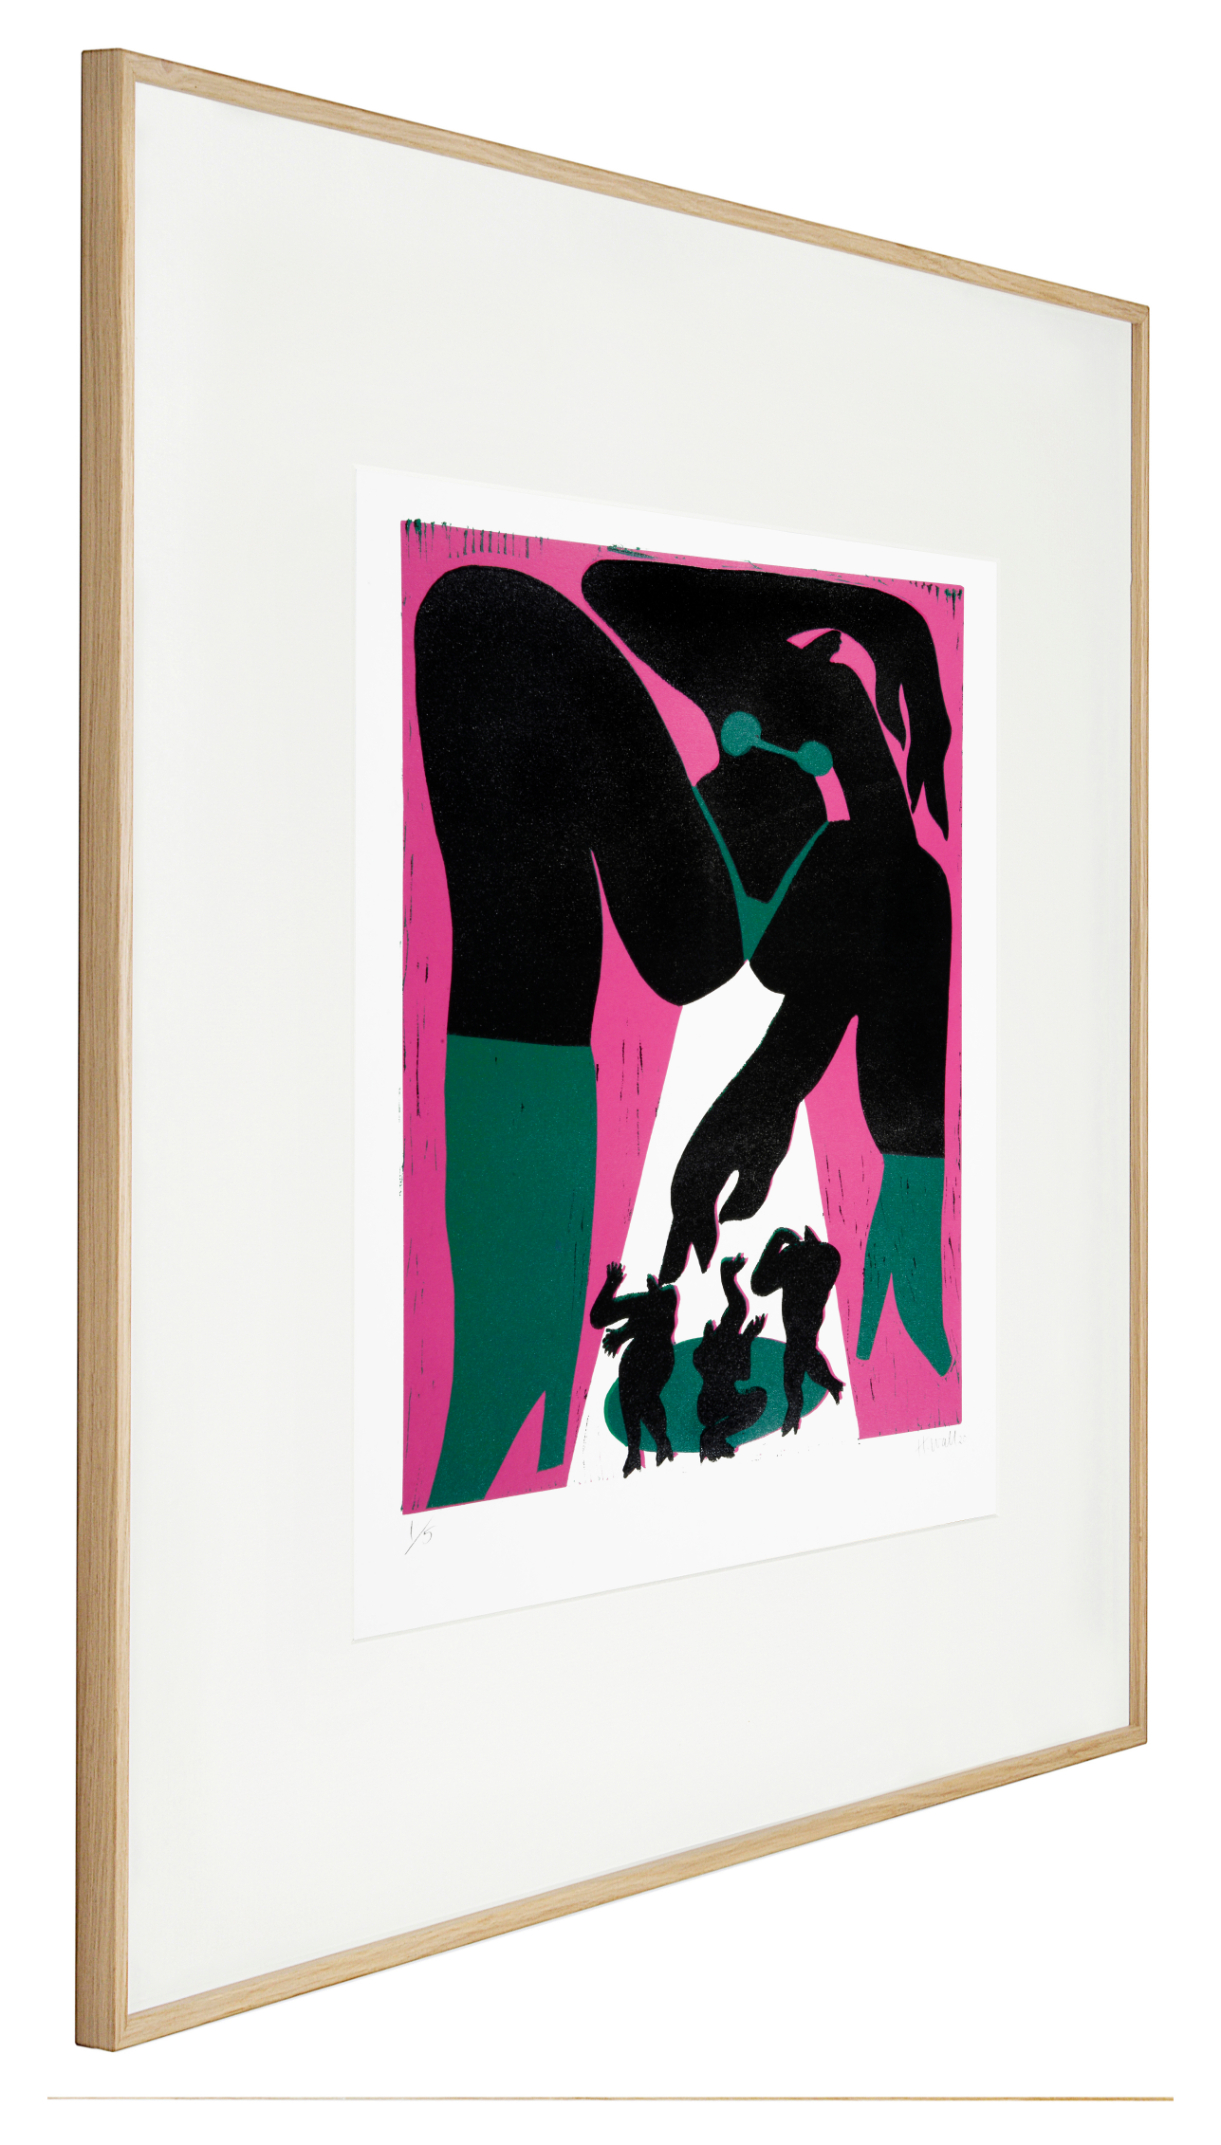 Hayley Wall, Untitled (pink and green), The Auction Collective